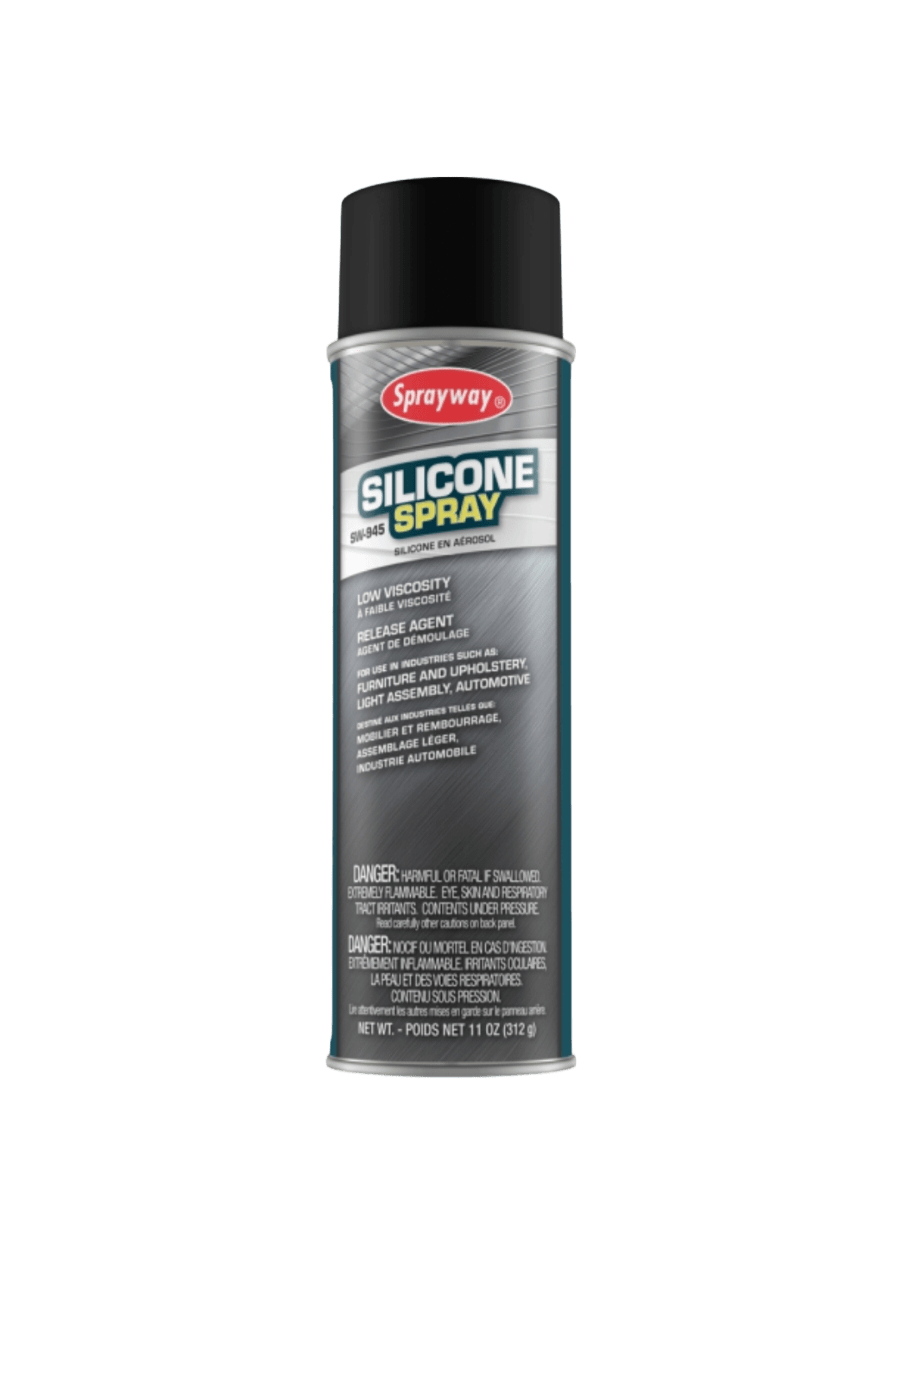 Sprayway 945 Silicone Spray: Versatile Lubrication and Protection